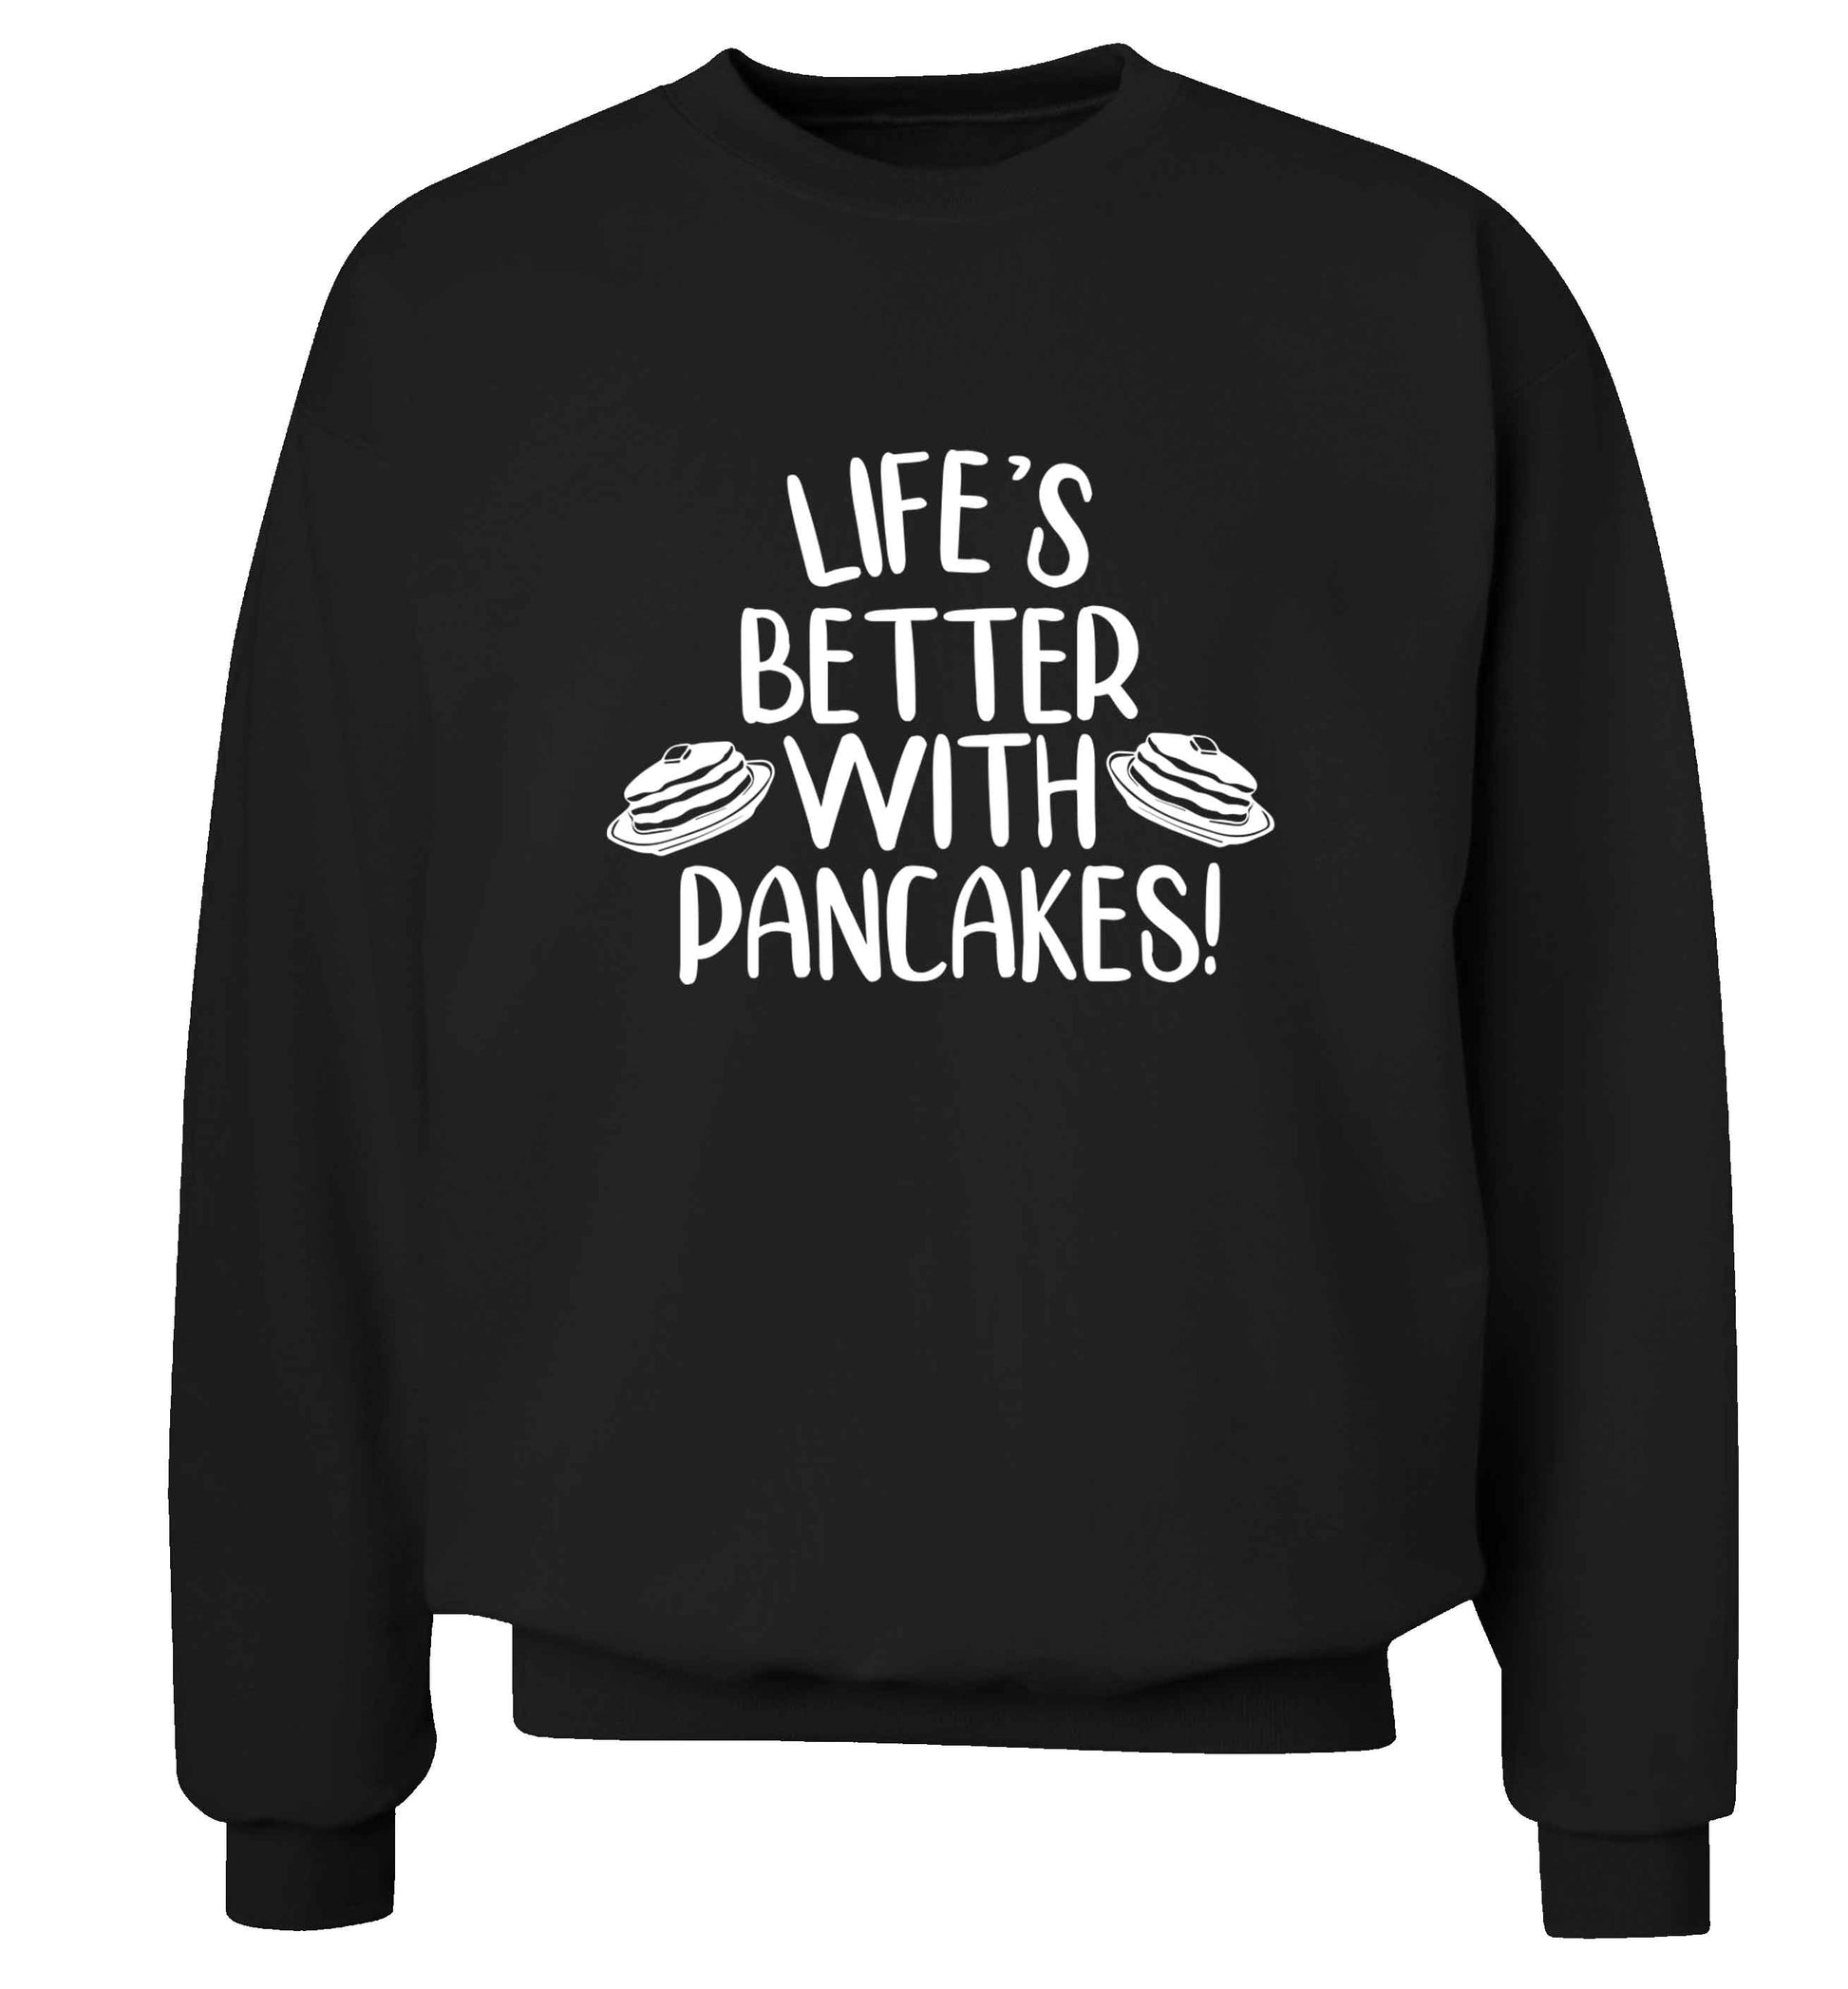 Life's better with pancakes adult's unisex black sweater 2XL